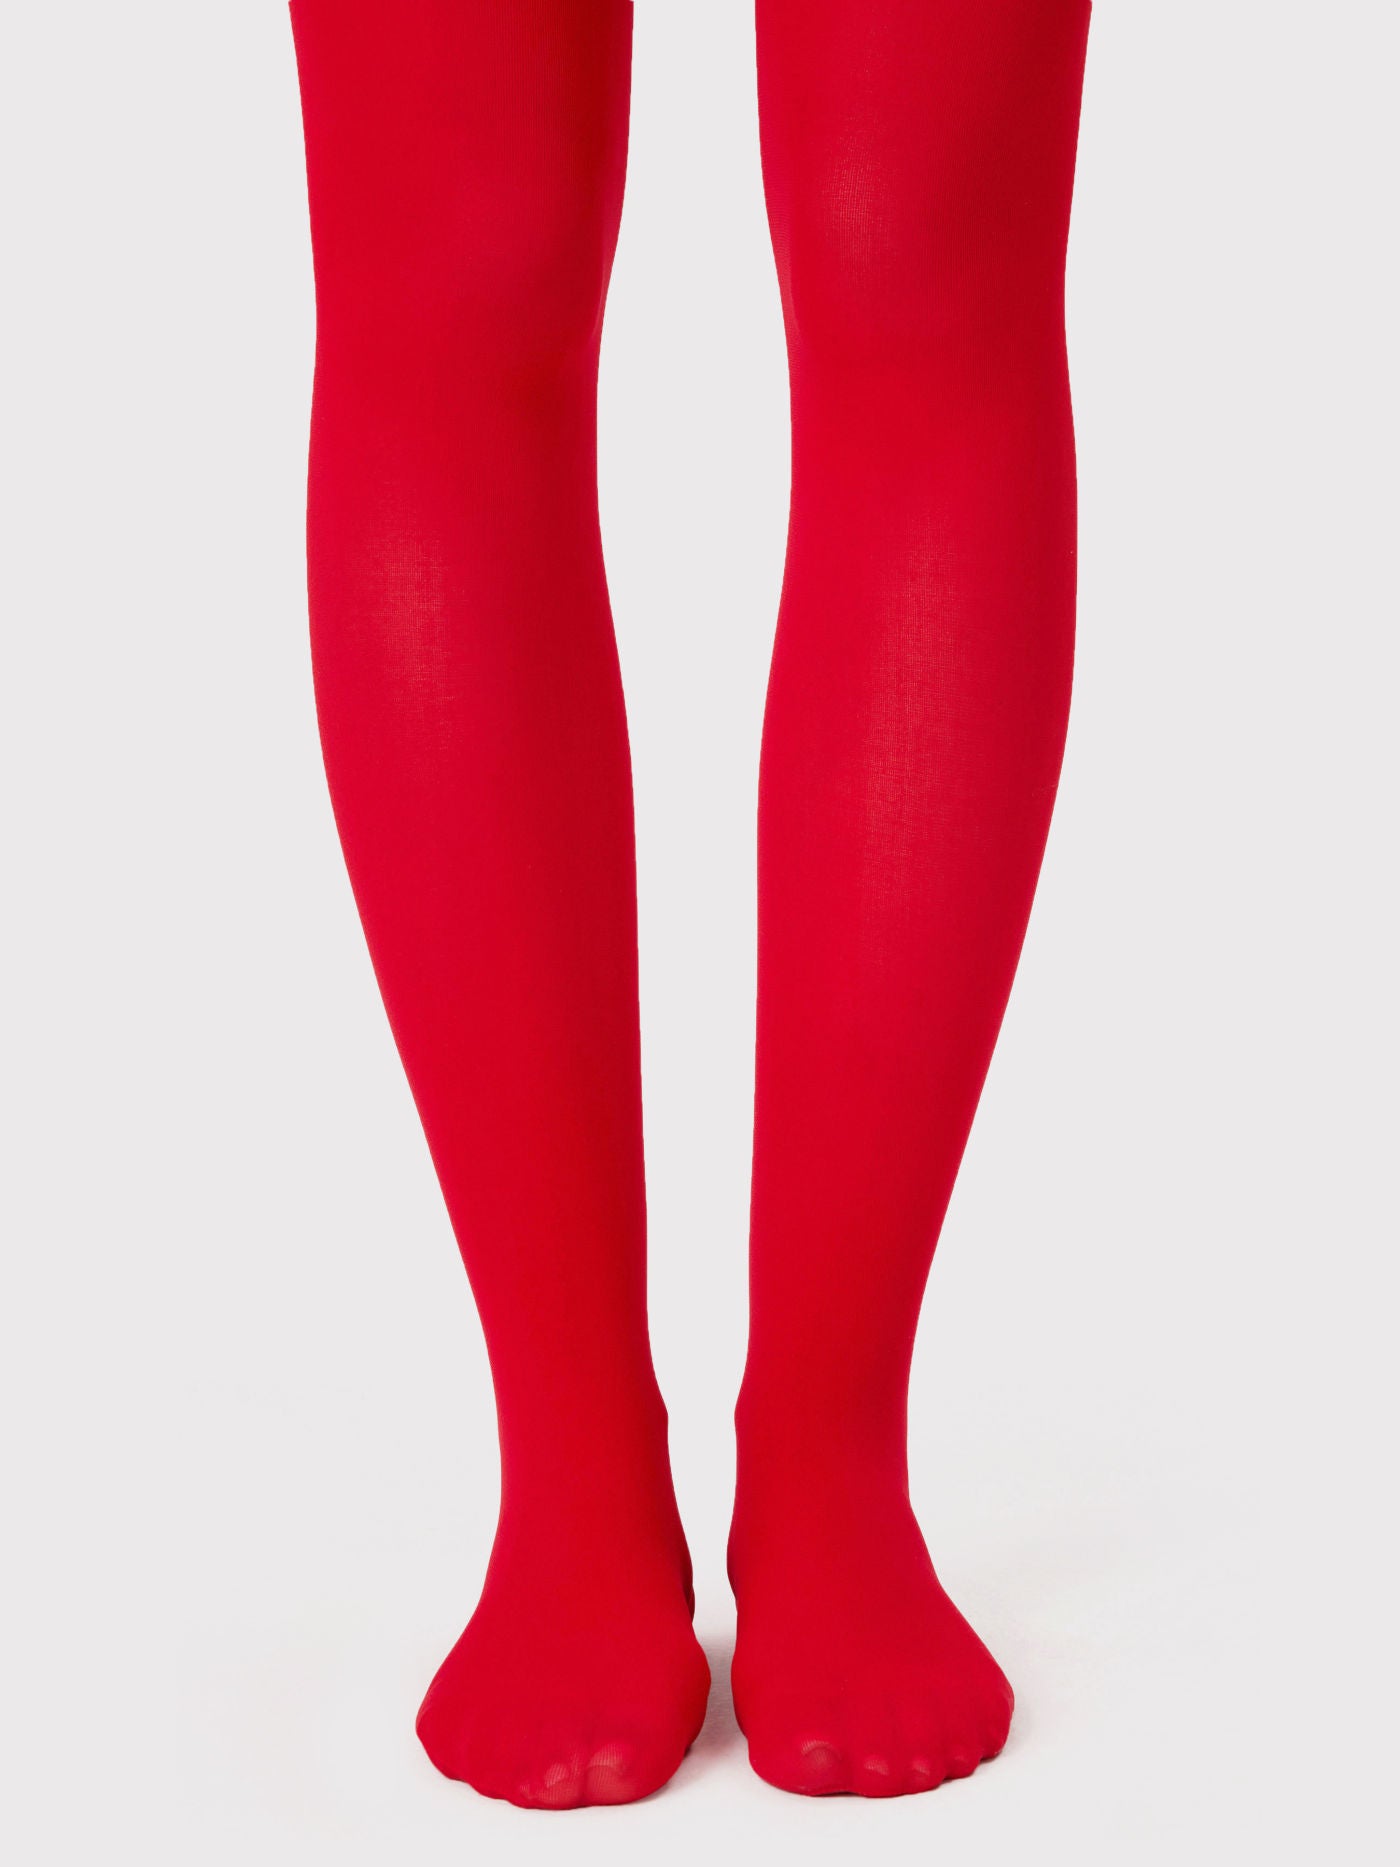 I Tried The Red Tights Trend For 24 Hours